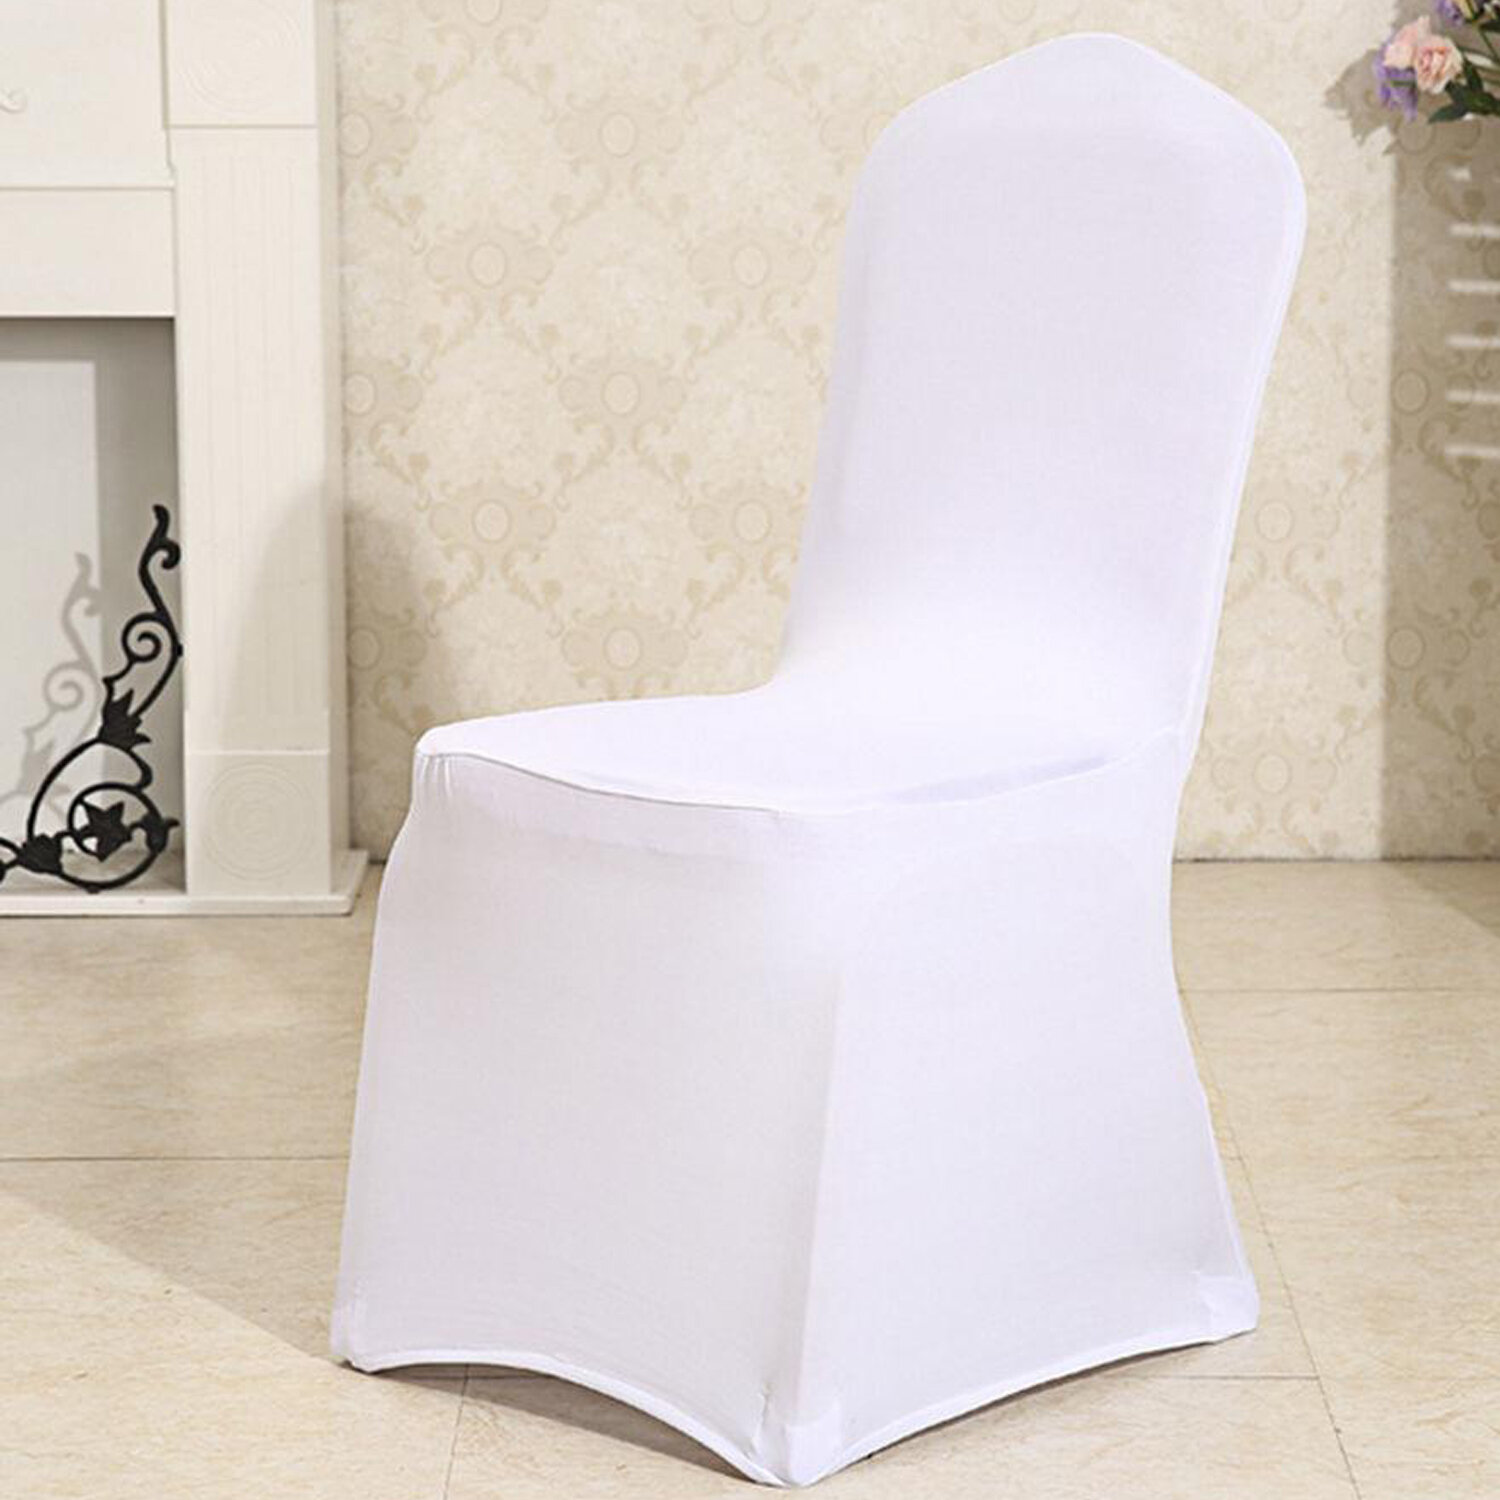 Slipcovers 100pcs Dining Chair Covers Wedding Party Home Seat Slip Covers Stretch Spandex Home Garden